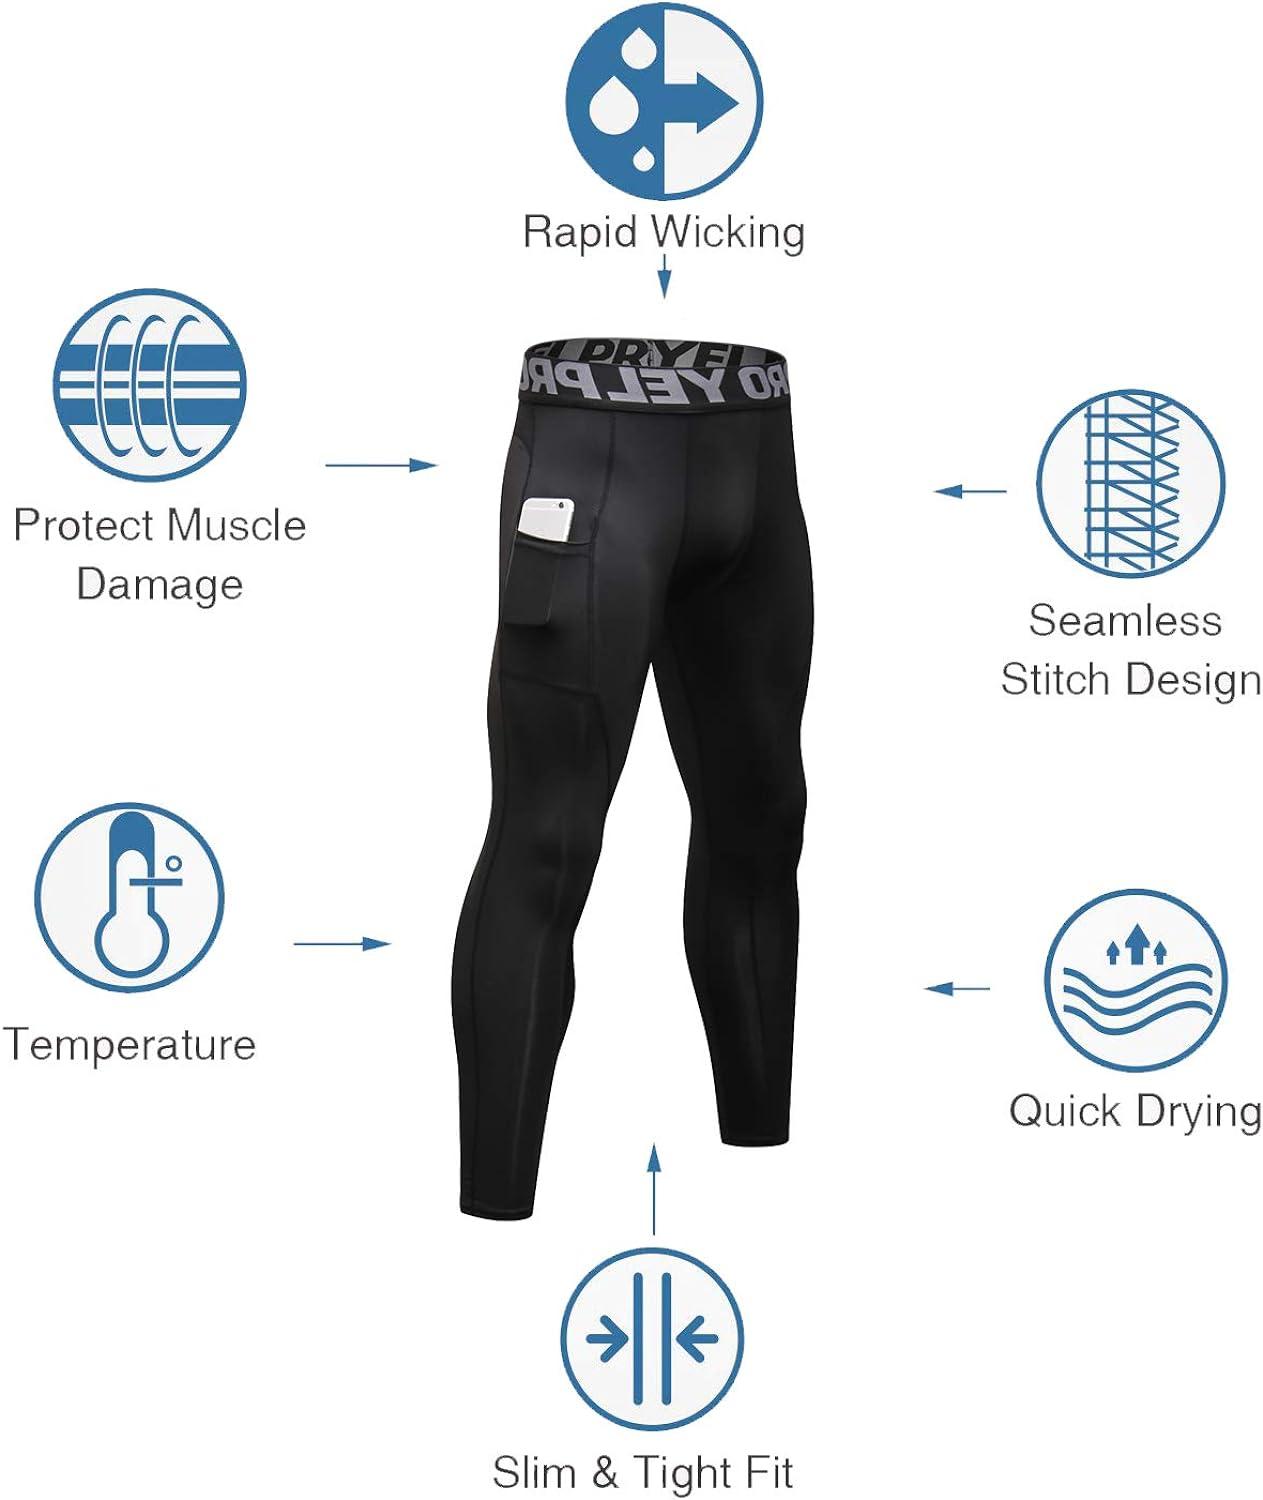 YUSHOW 2 Pack Men's Compression Pants Running Tights Workout Leggings,  Summer Cool Dry Technical Sports Baselayer